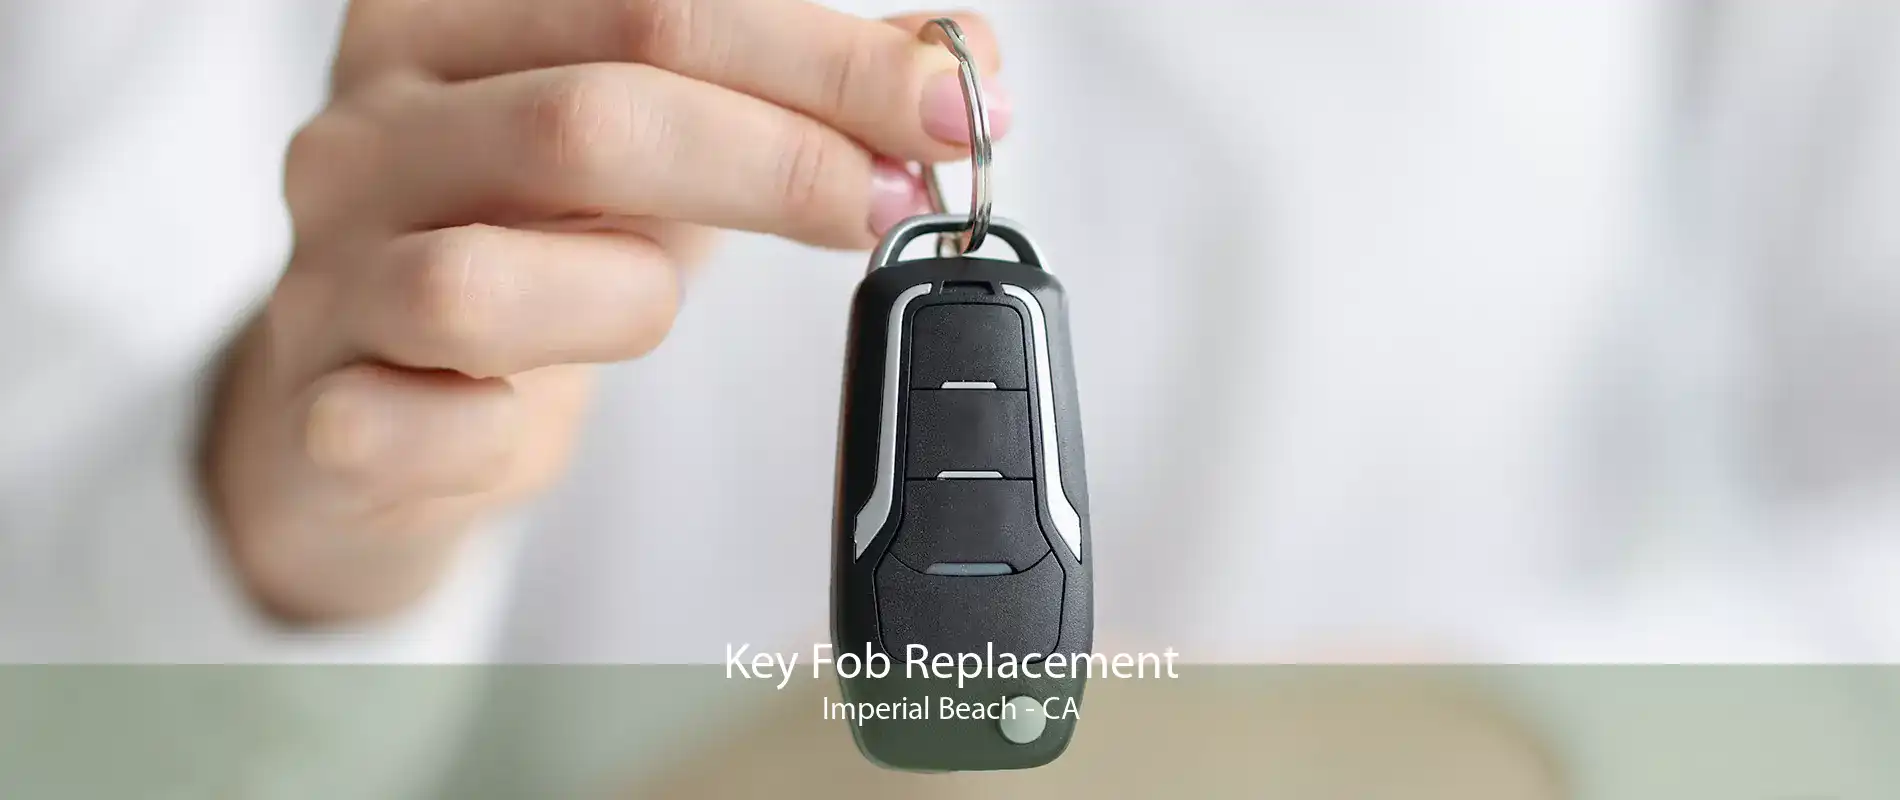 Key Fob Replacement Imperial Beach - CA